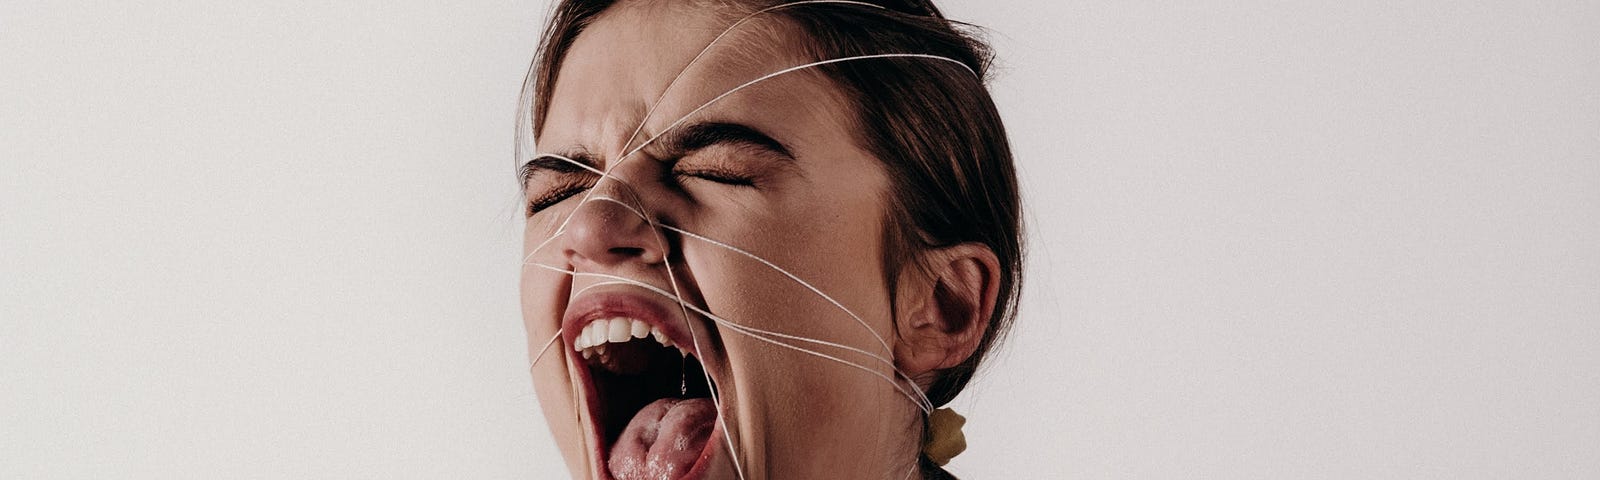 Woman screaming in anger with elastic bands binding her face